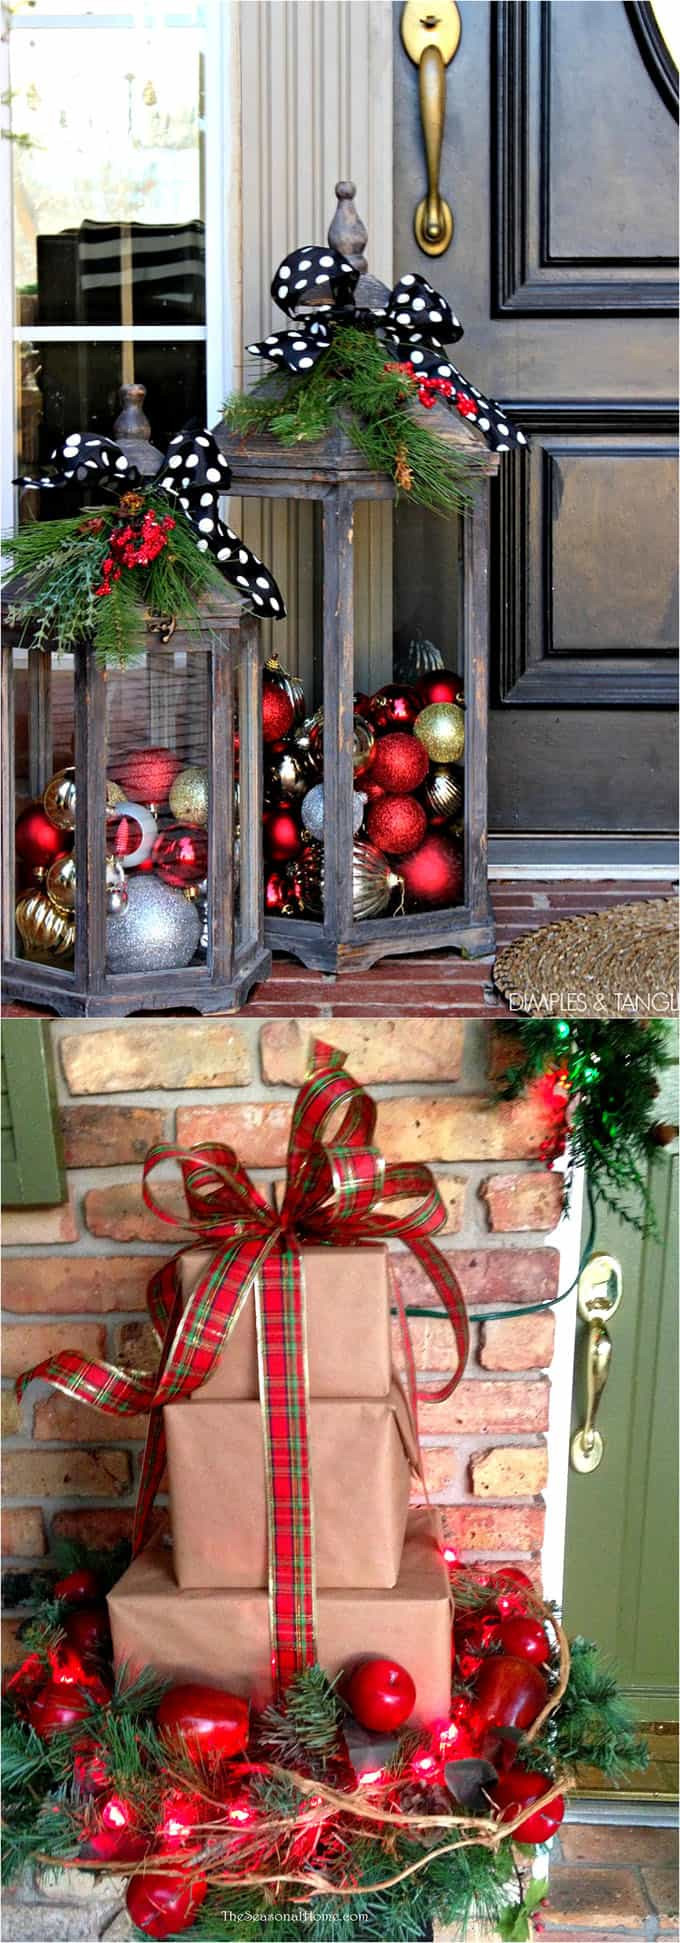 DIY Christmas Outdoor Decorations
 Gorgeous Outdoor Christmas Decorations 32 Best Ideas